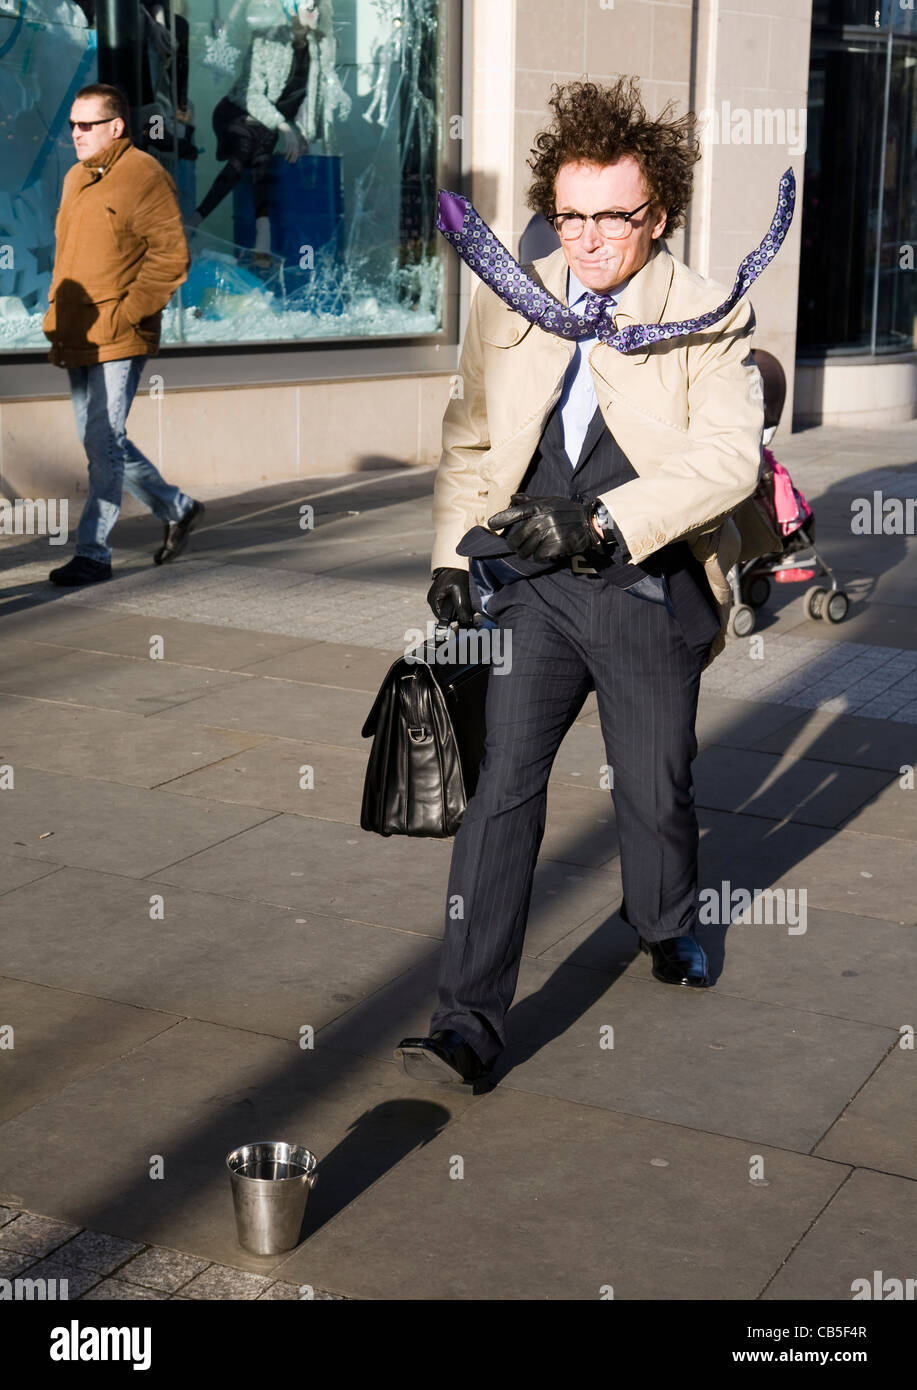 Man in a Hurry" Stationary Artist - Motionless on the City Streets, with  Briefcase and elevated stiffened Tie, Manchester UK Stock Photo - Alamy